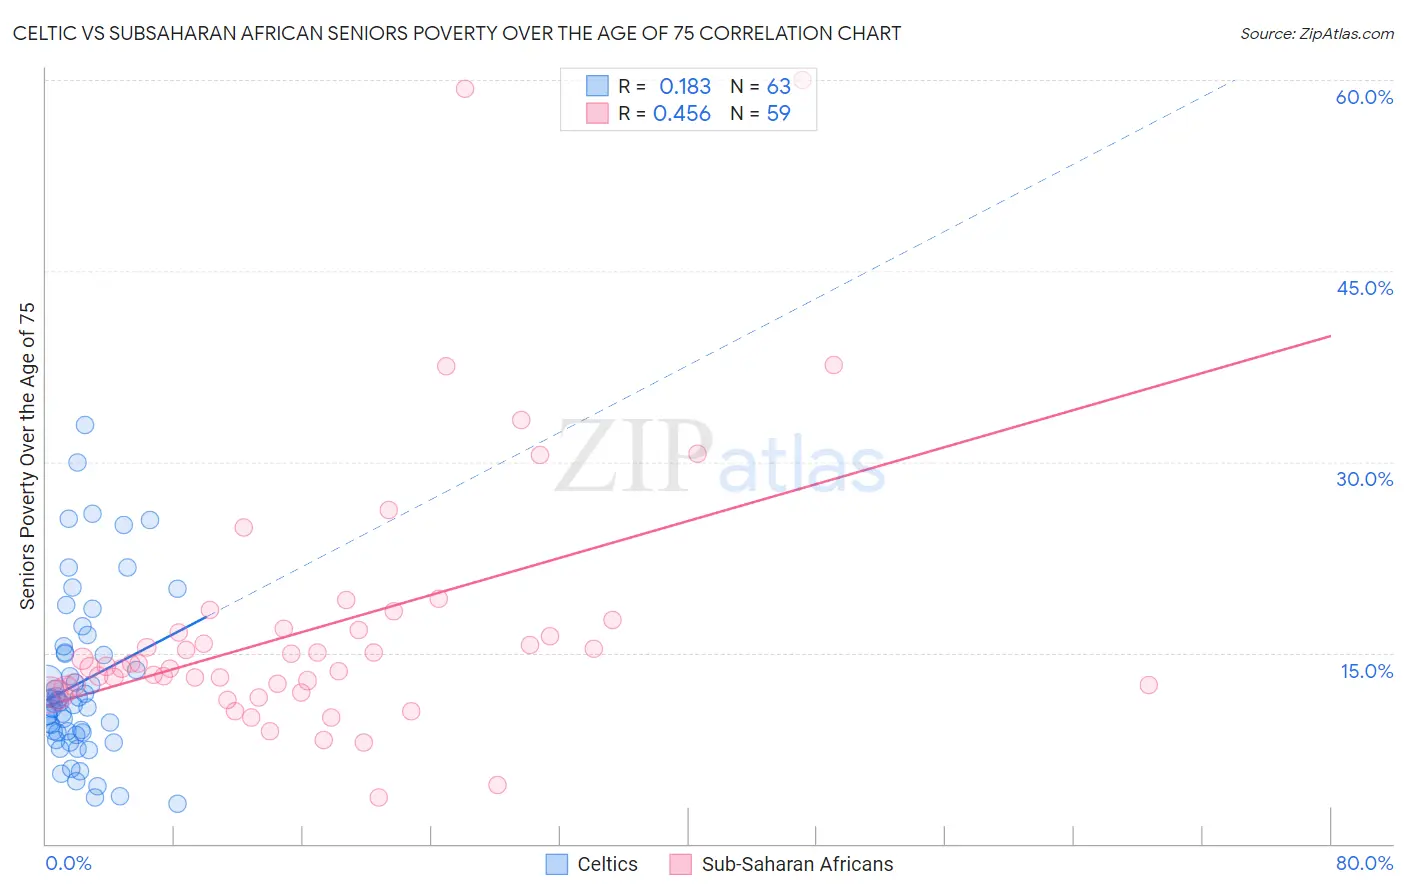 Celtic vs Subsaharan African Seniors Poverty Over the Age of 75